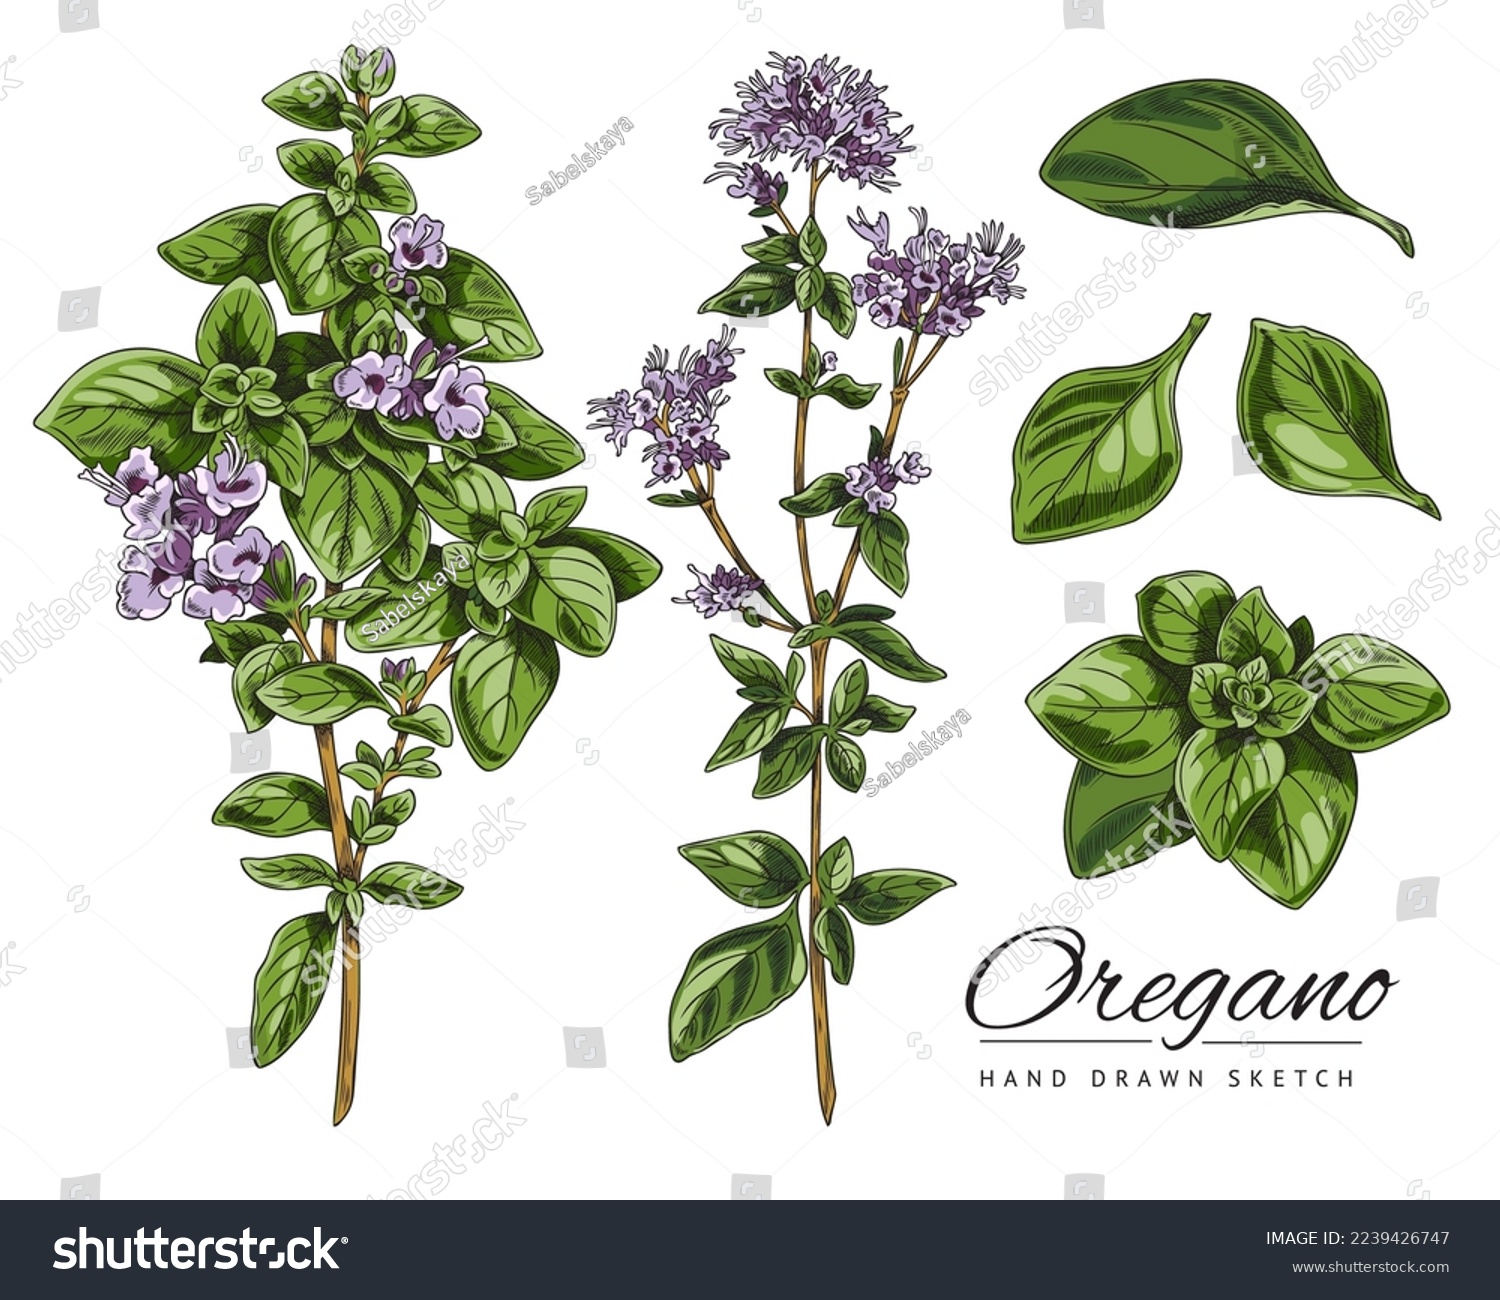 Oregano branches with leaves and flowers, sketch vector illustration isolated on white background. Set of hand drawn oregano herbs. Delicious plant for cooking. #2239426747